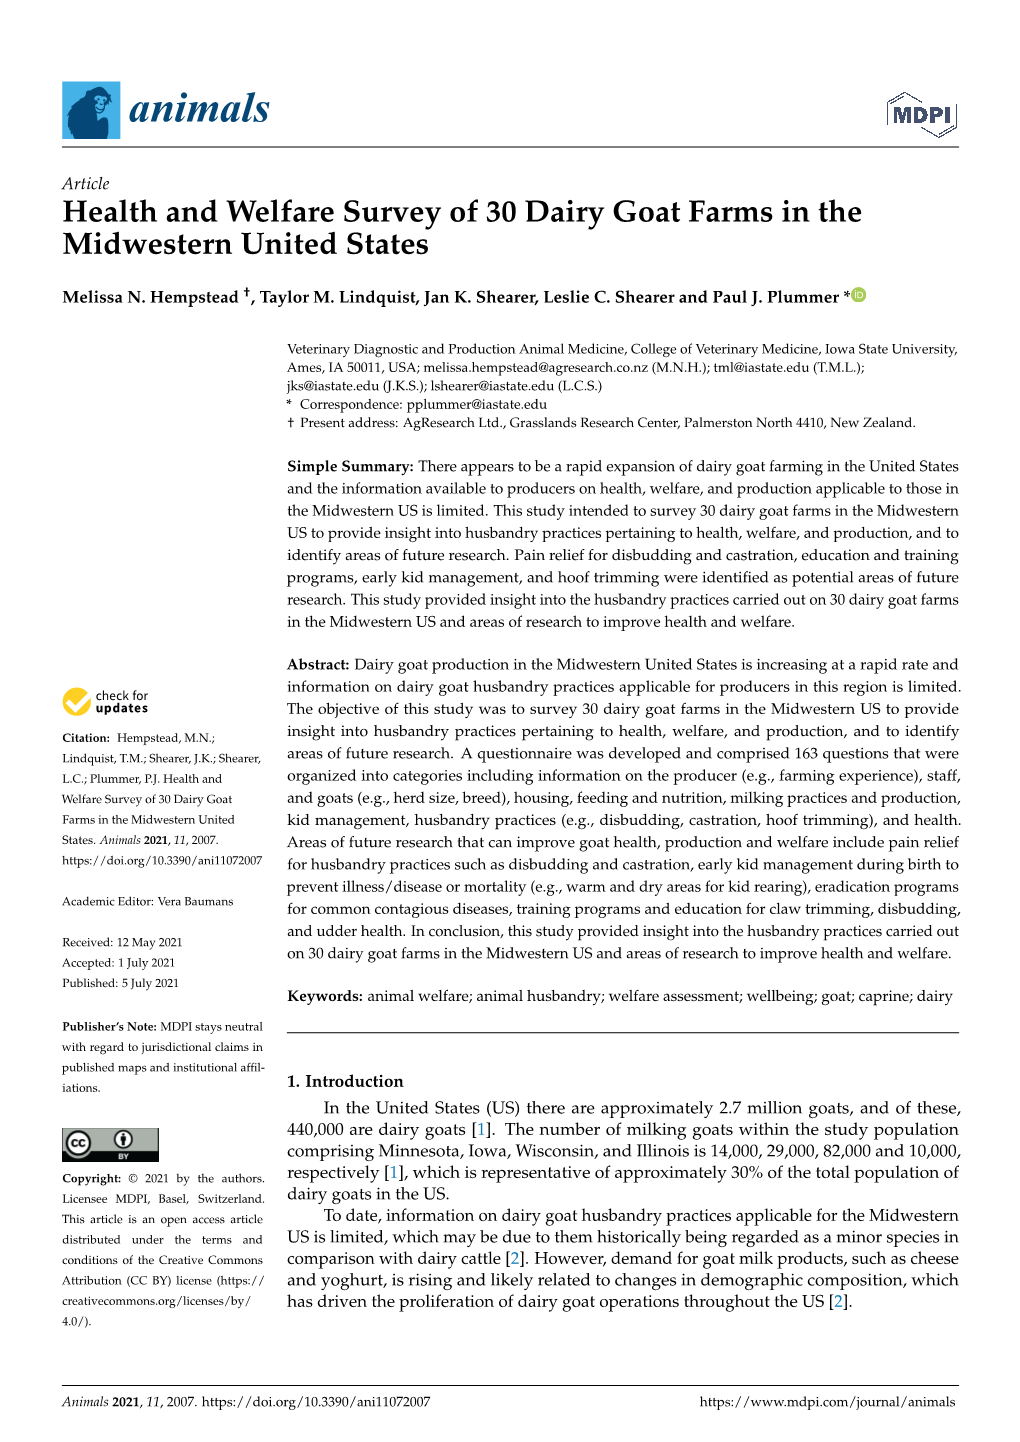 Health and Welfare Survey of 30 Dairy Goat Farms in the Midwestern United States